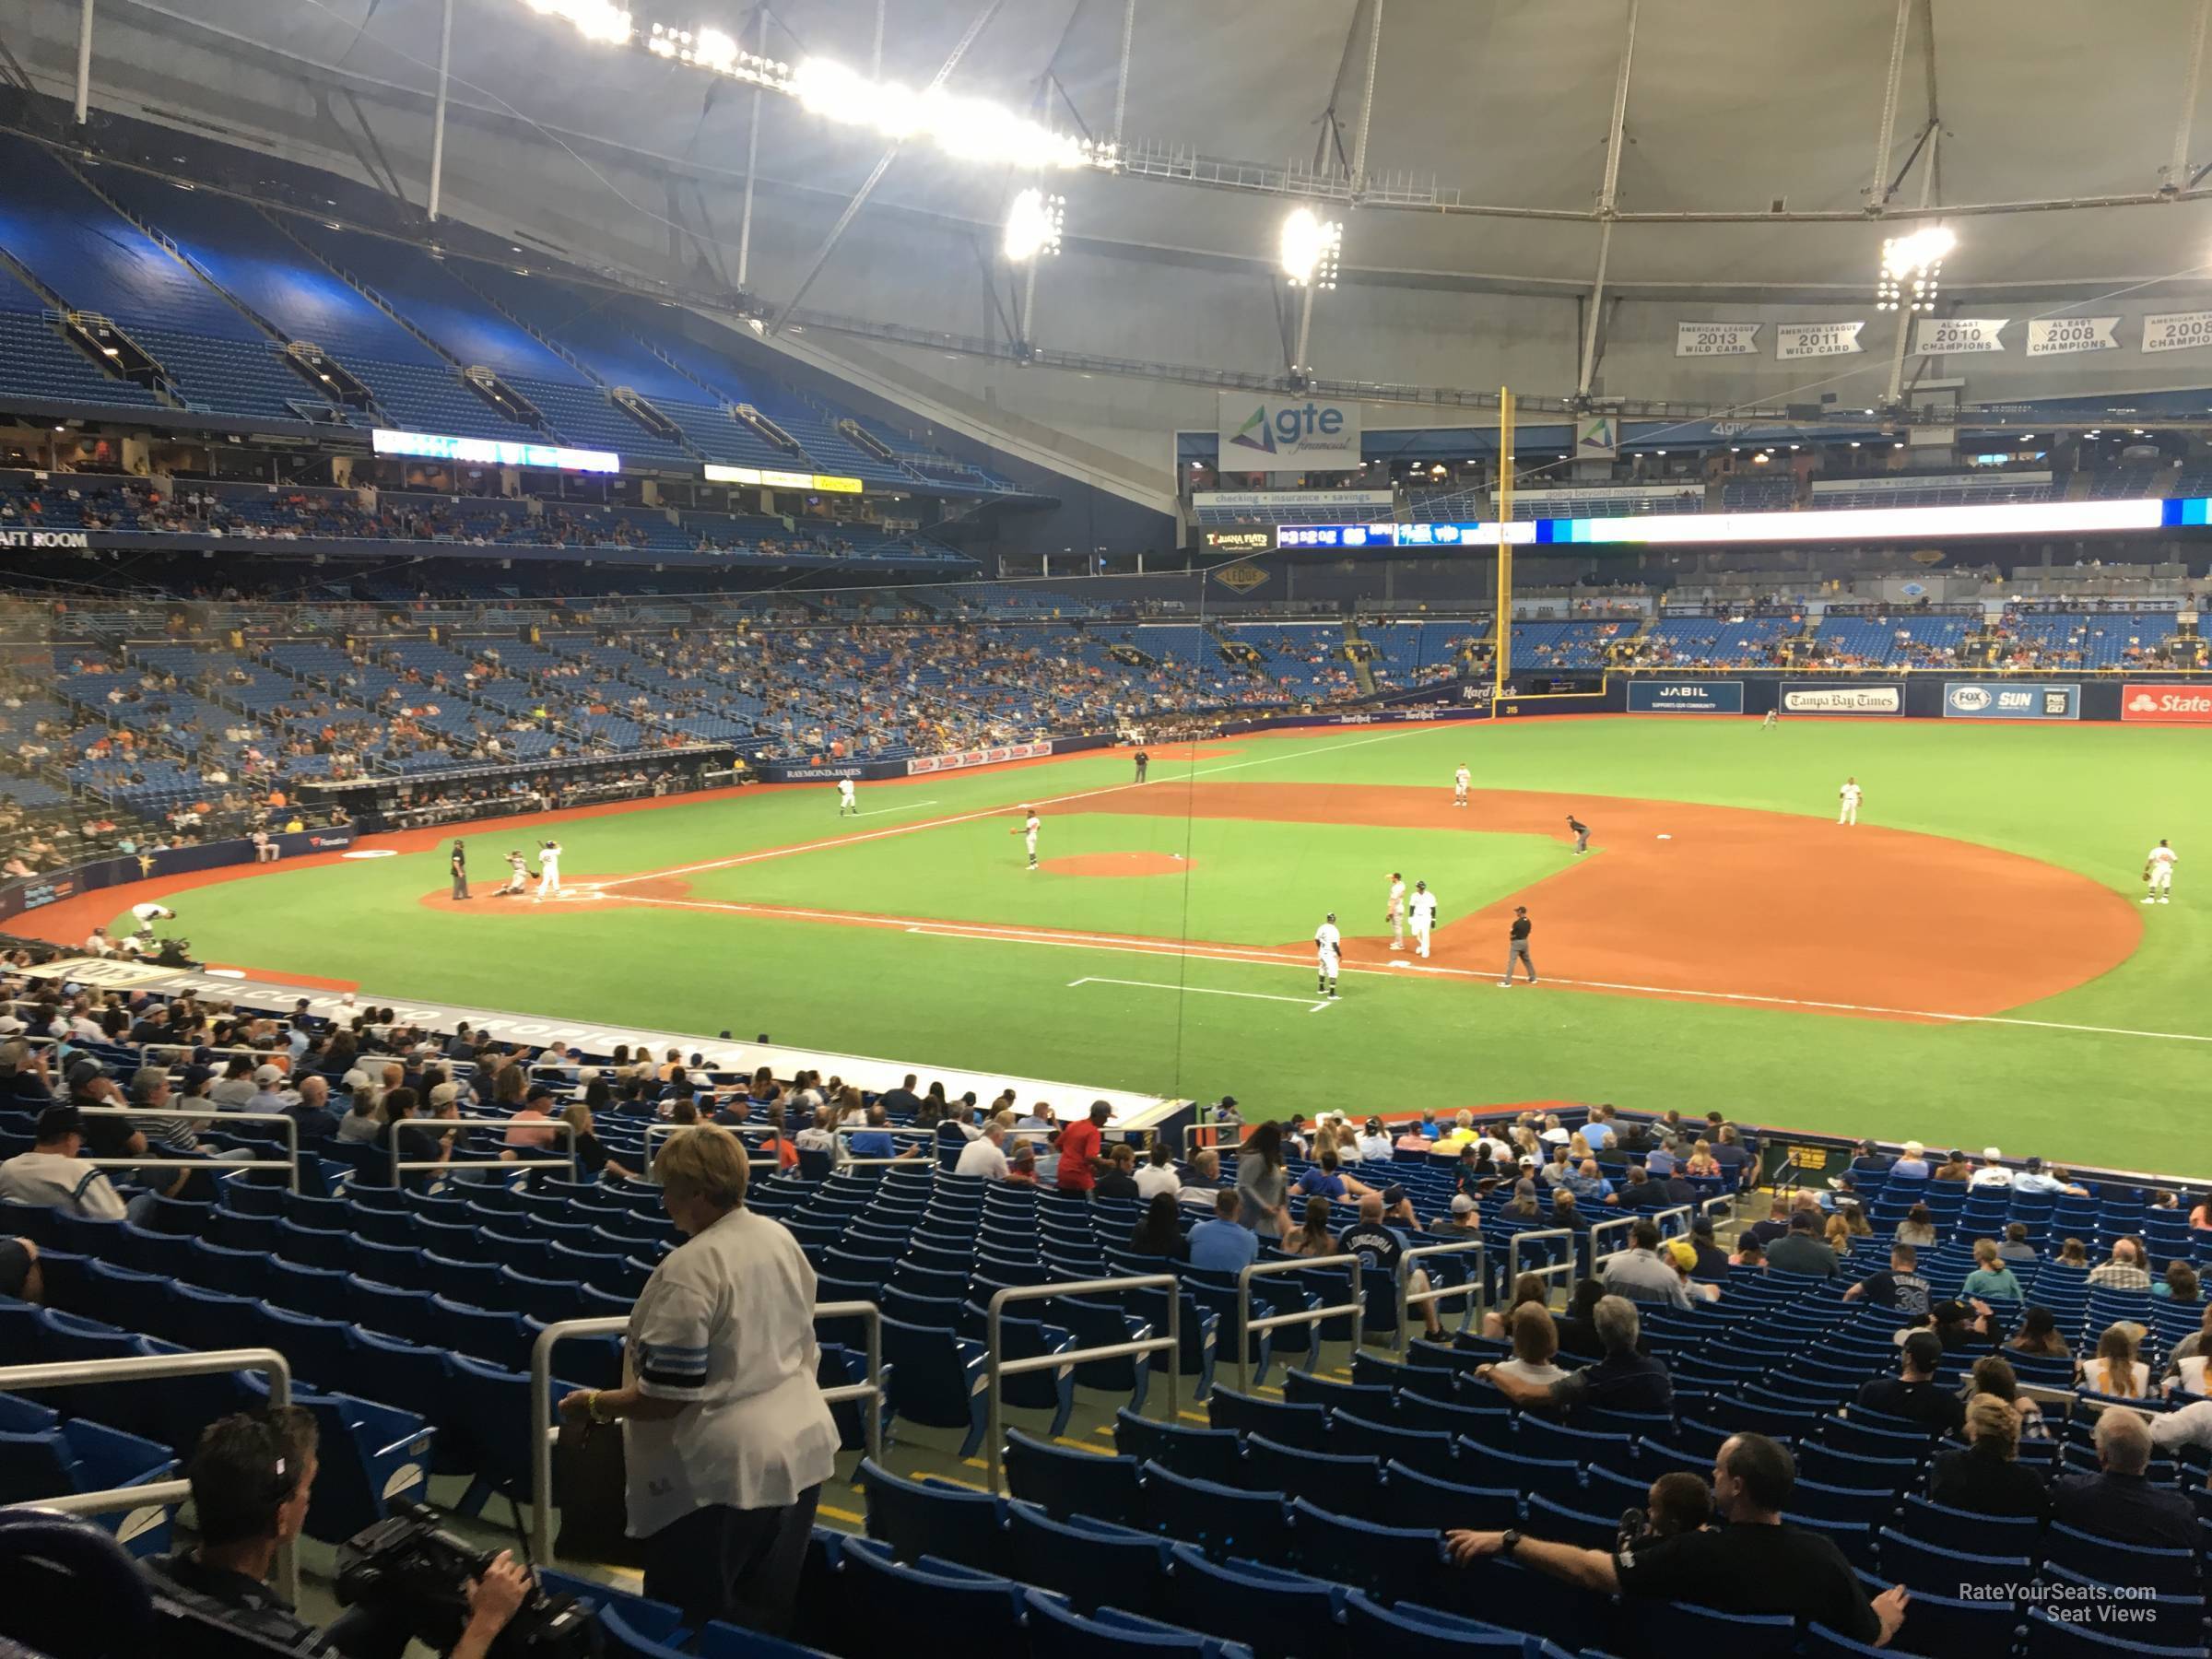 Tampa Bay Rays Tropicana Field Seating Chart With Rows Cabinets Matttroy